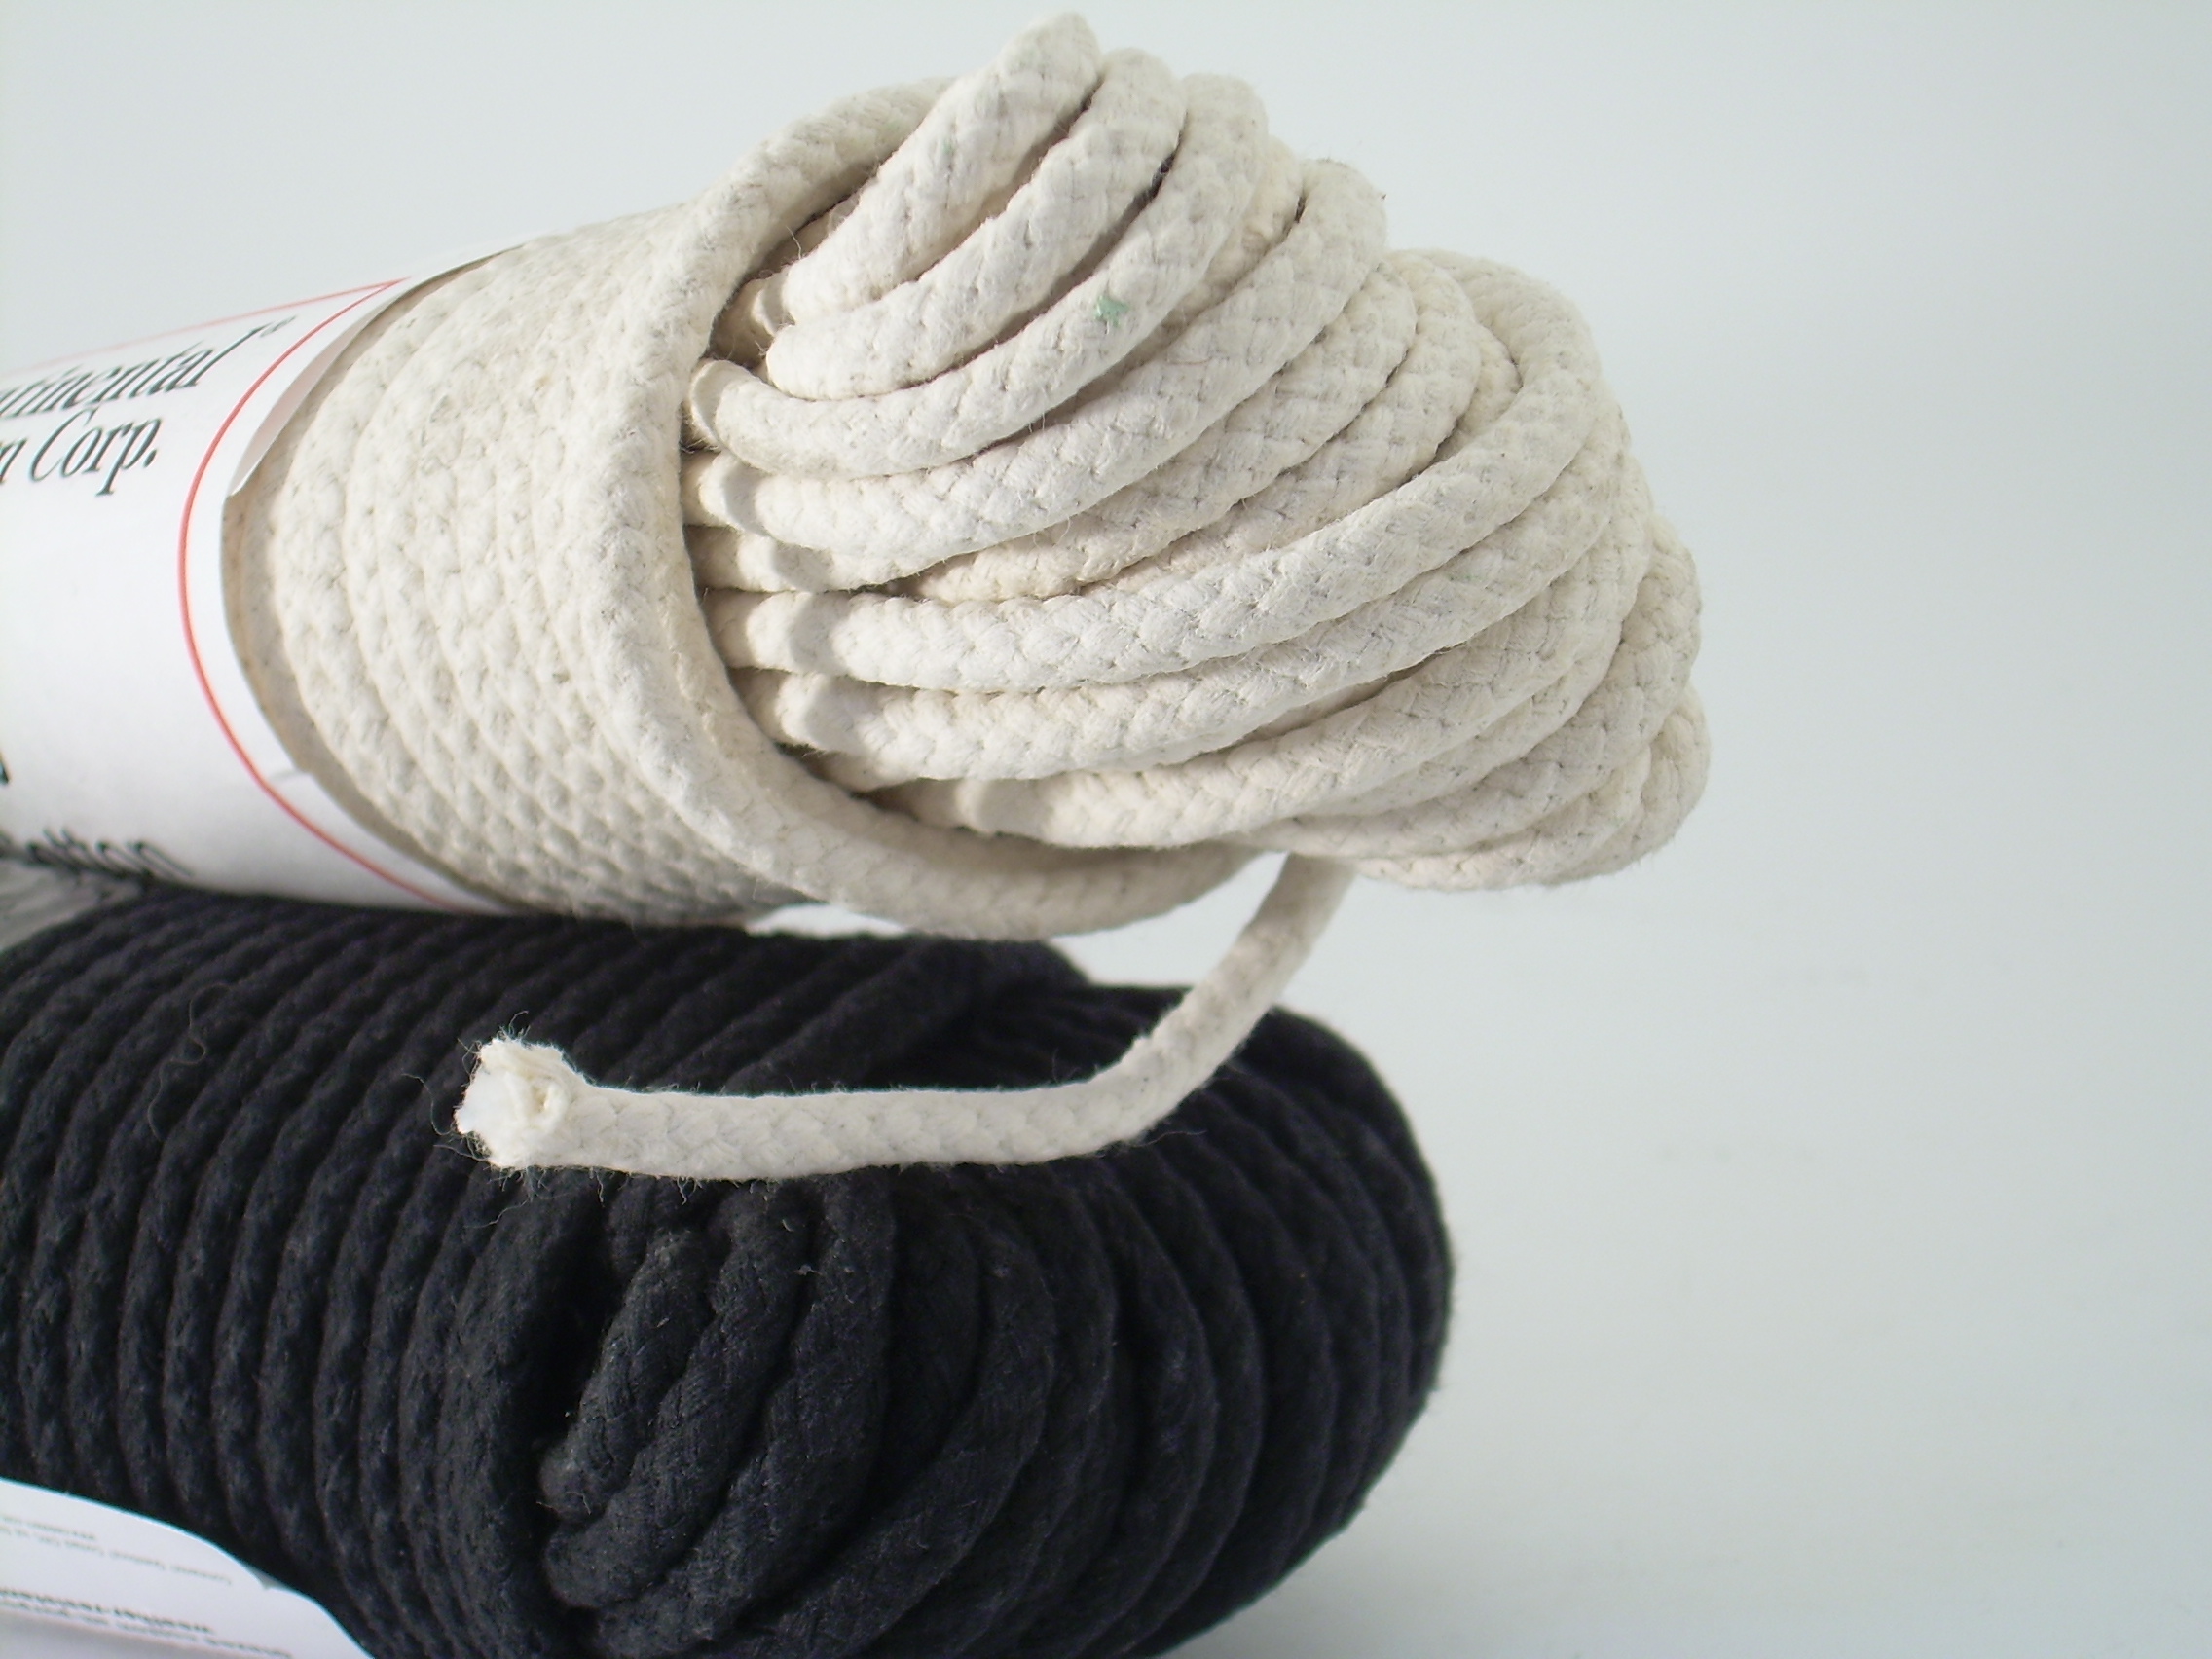 Ø 7mm x 5m Cotton sash cord FREE delivery - Rope Galore